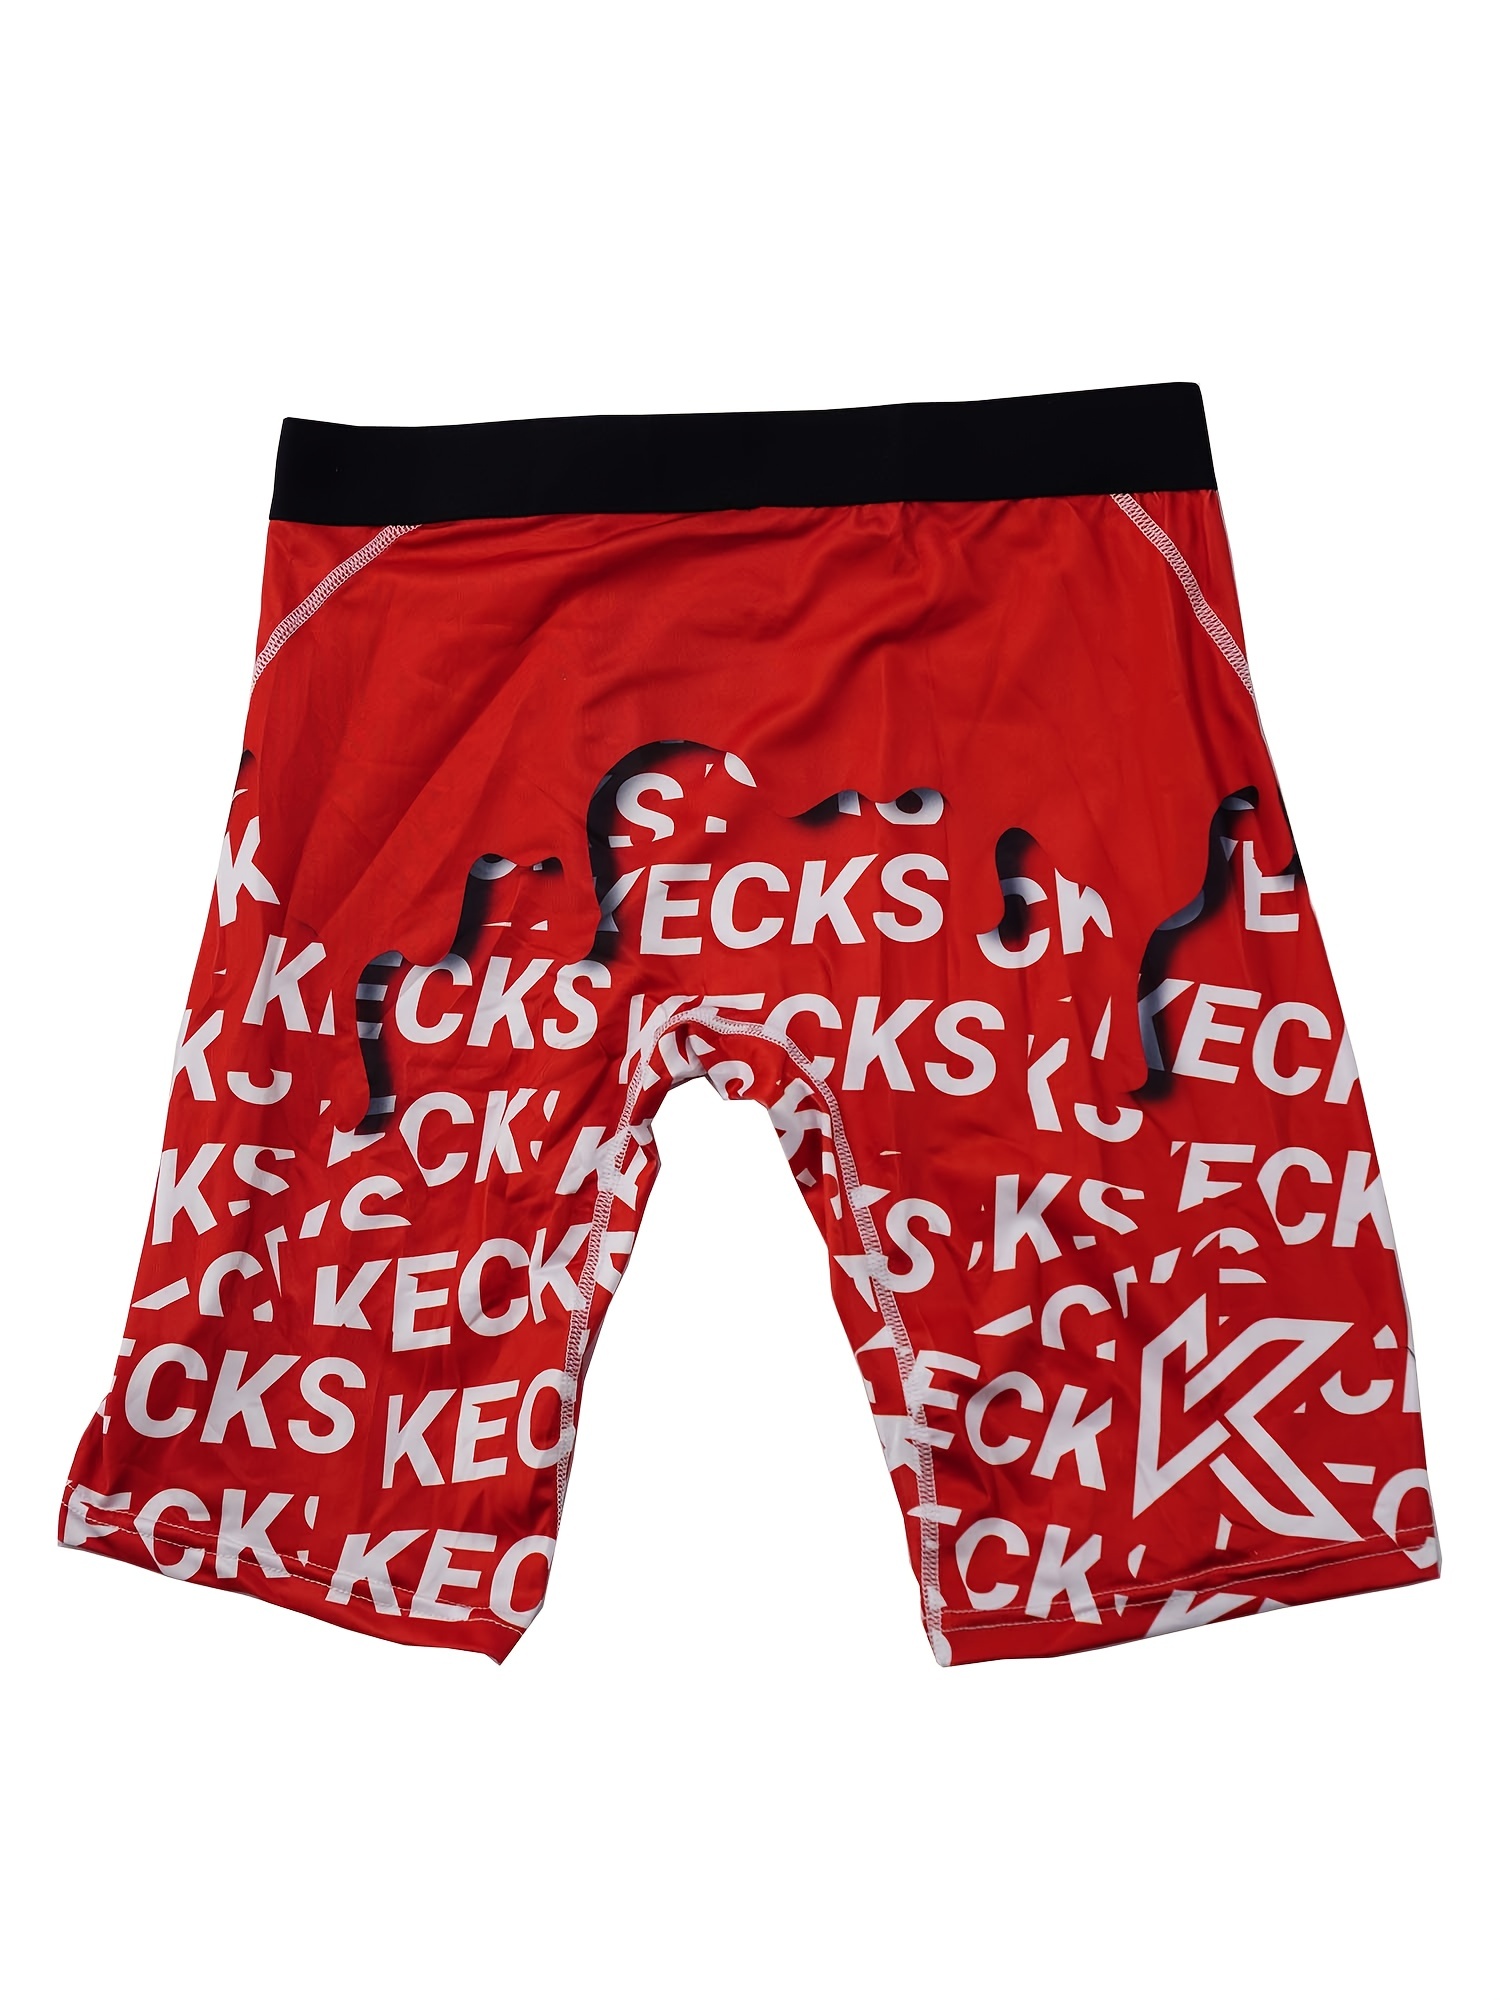 Mens Novelty Kecks Boxers Breathable Comfortable Stretch Adult